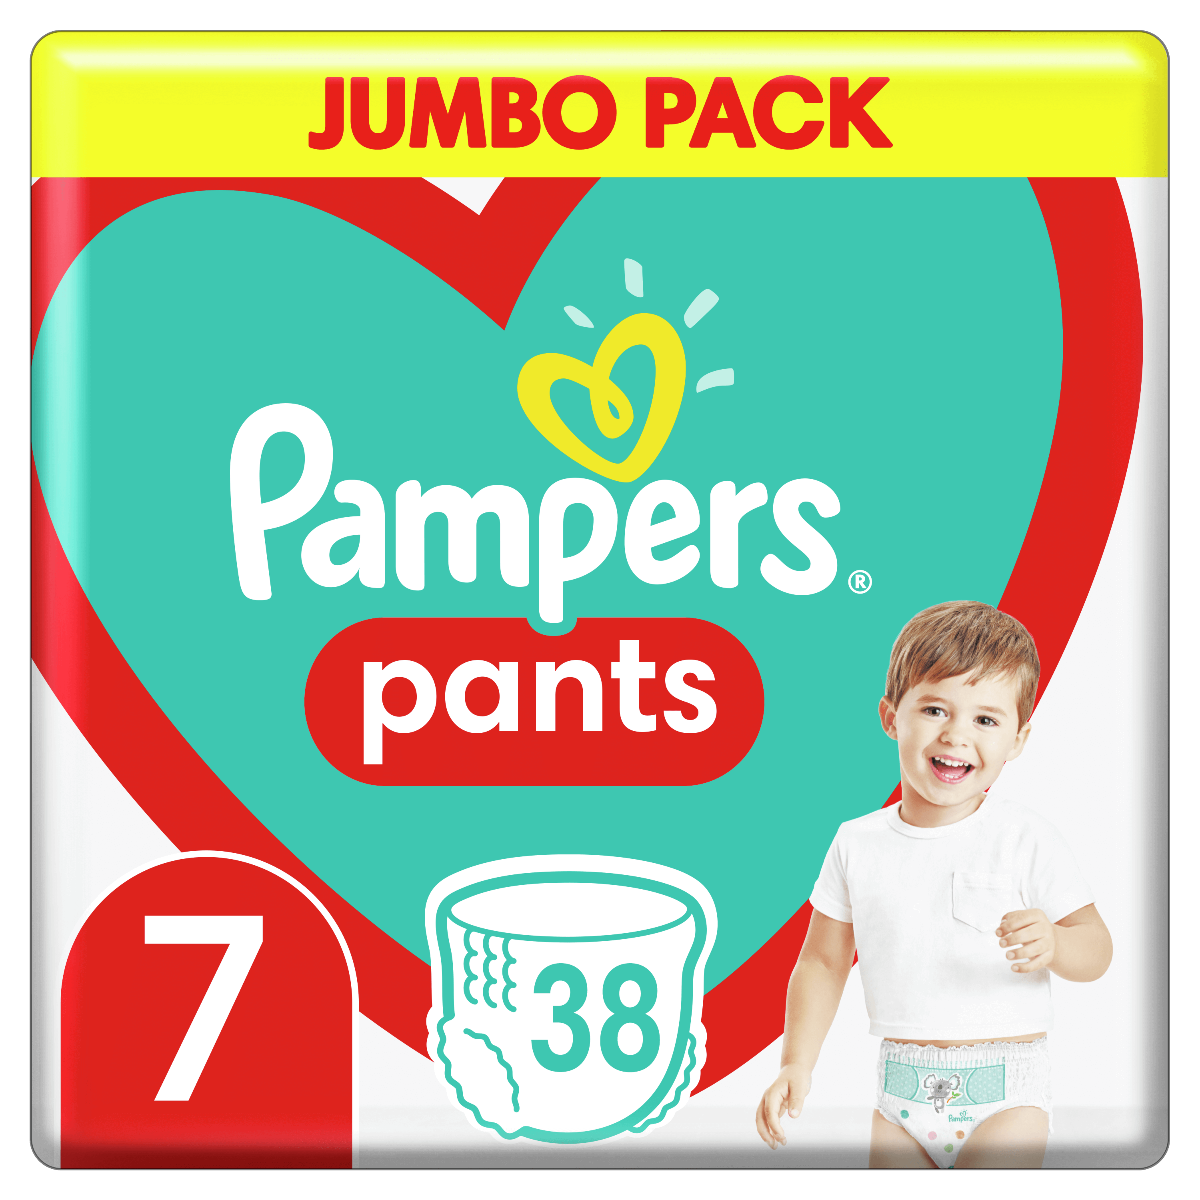 pampers size 2 big box